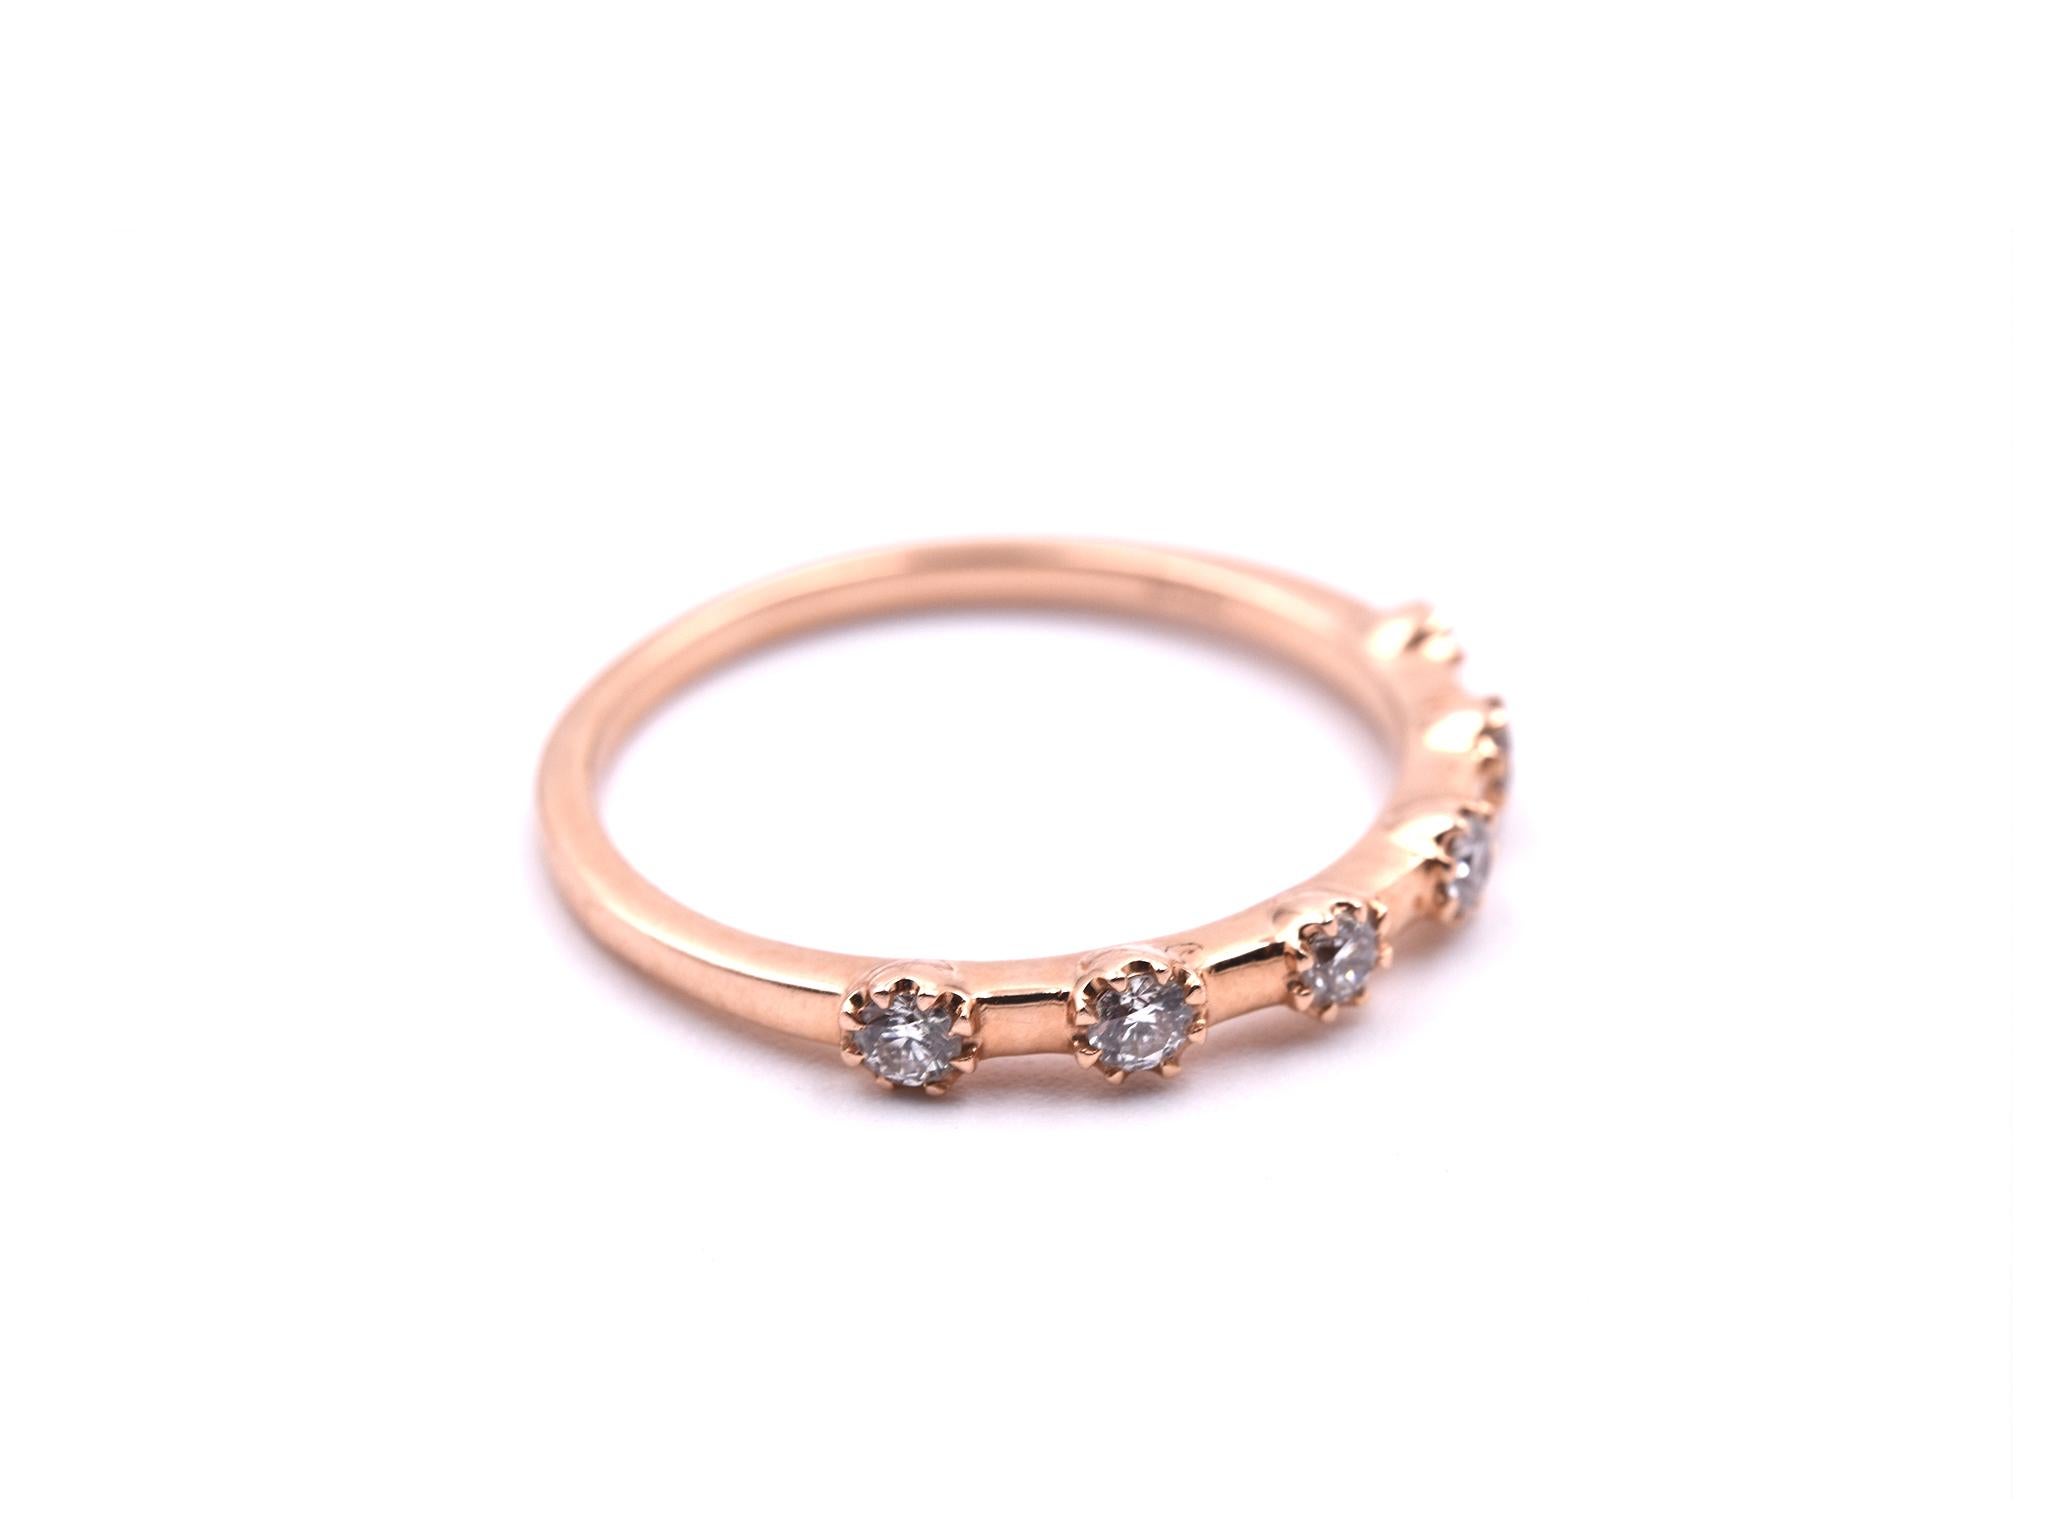 Designer: custom design
Material: 14k rose gold
Diamonds: 6 round brilliant cut = .25cttw
Color: G
Clarity: VS
Ring size: 6 ½ (please allow two additional shipping days for sizing requests)
Dimensions: ring is approximately 2.61mm wide
Weight: 1.66